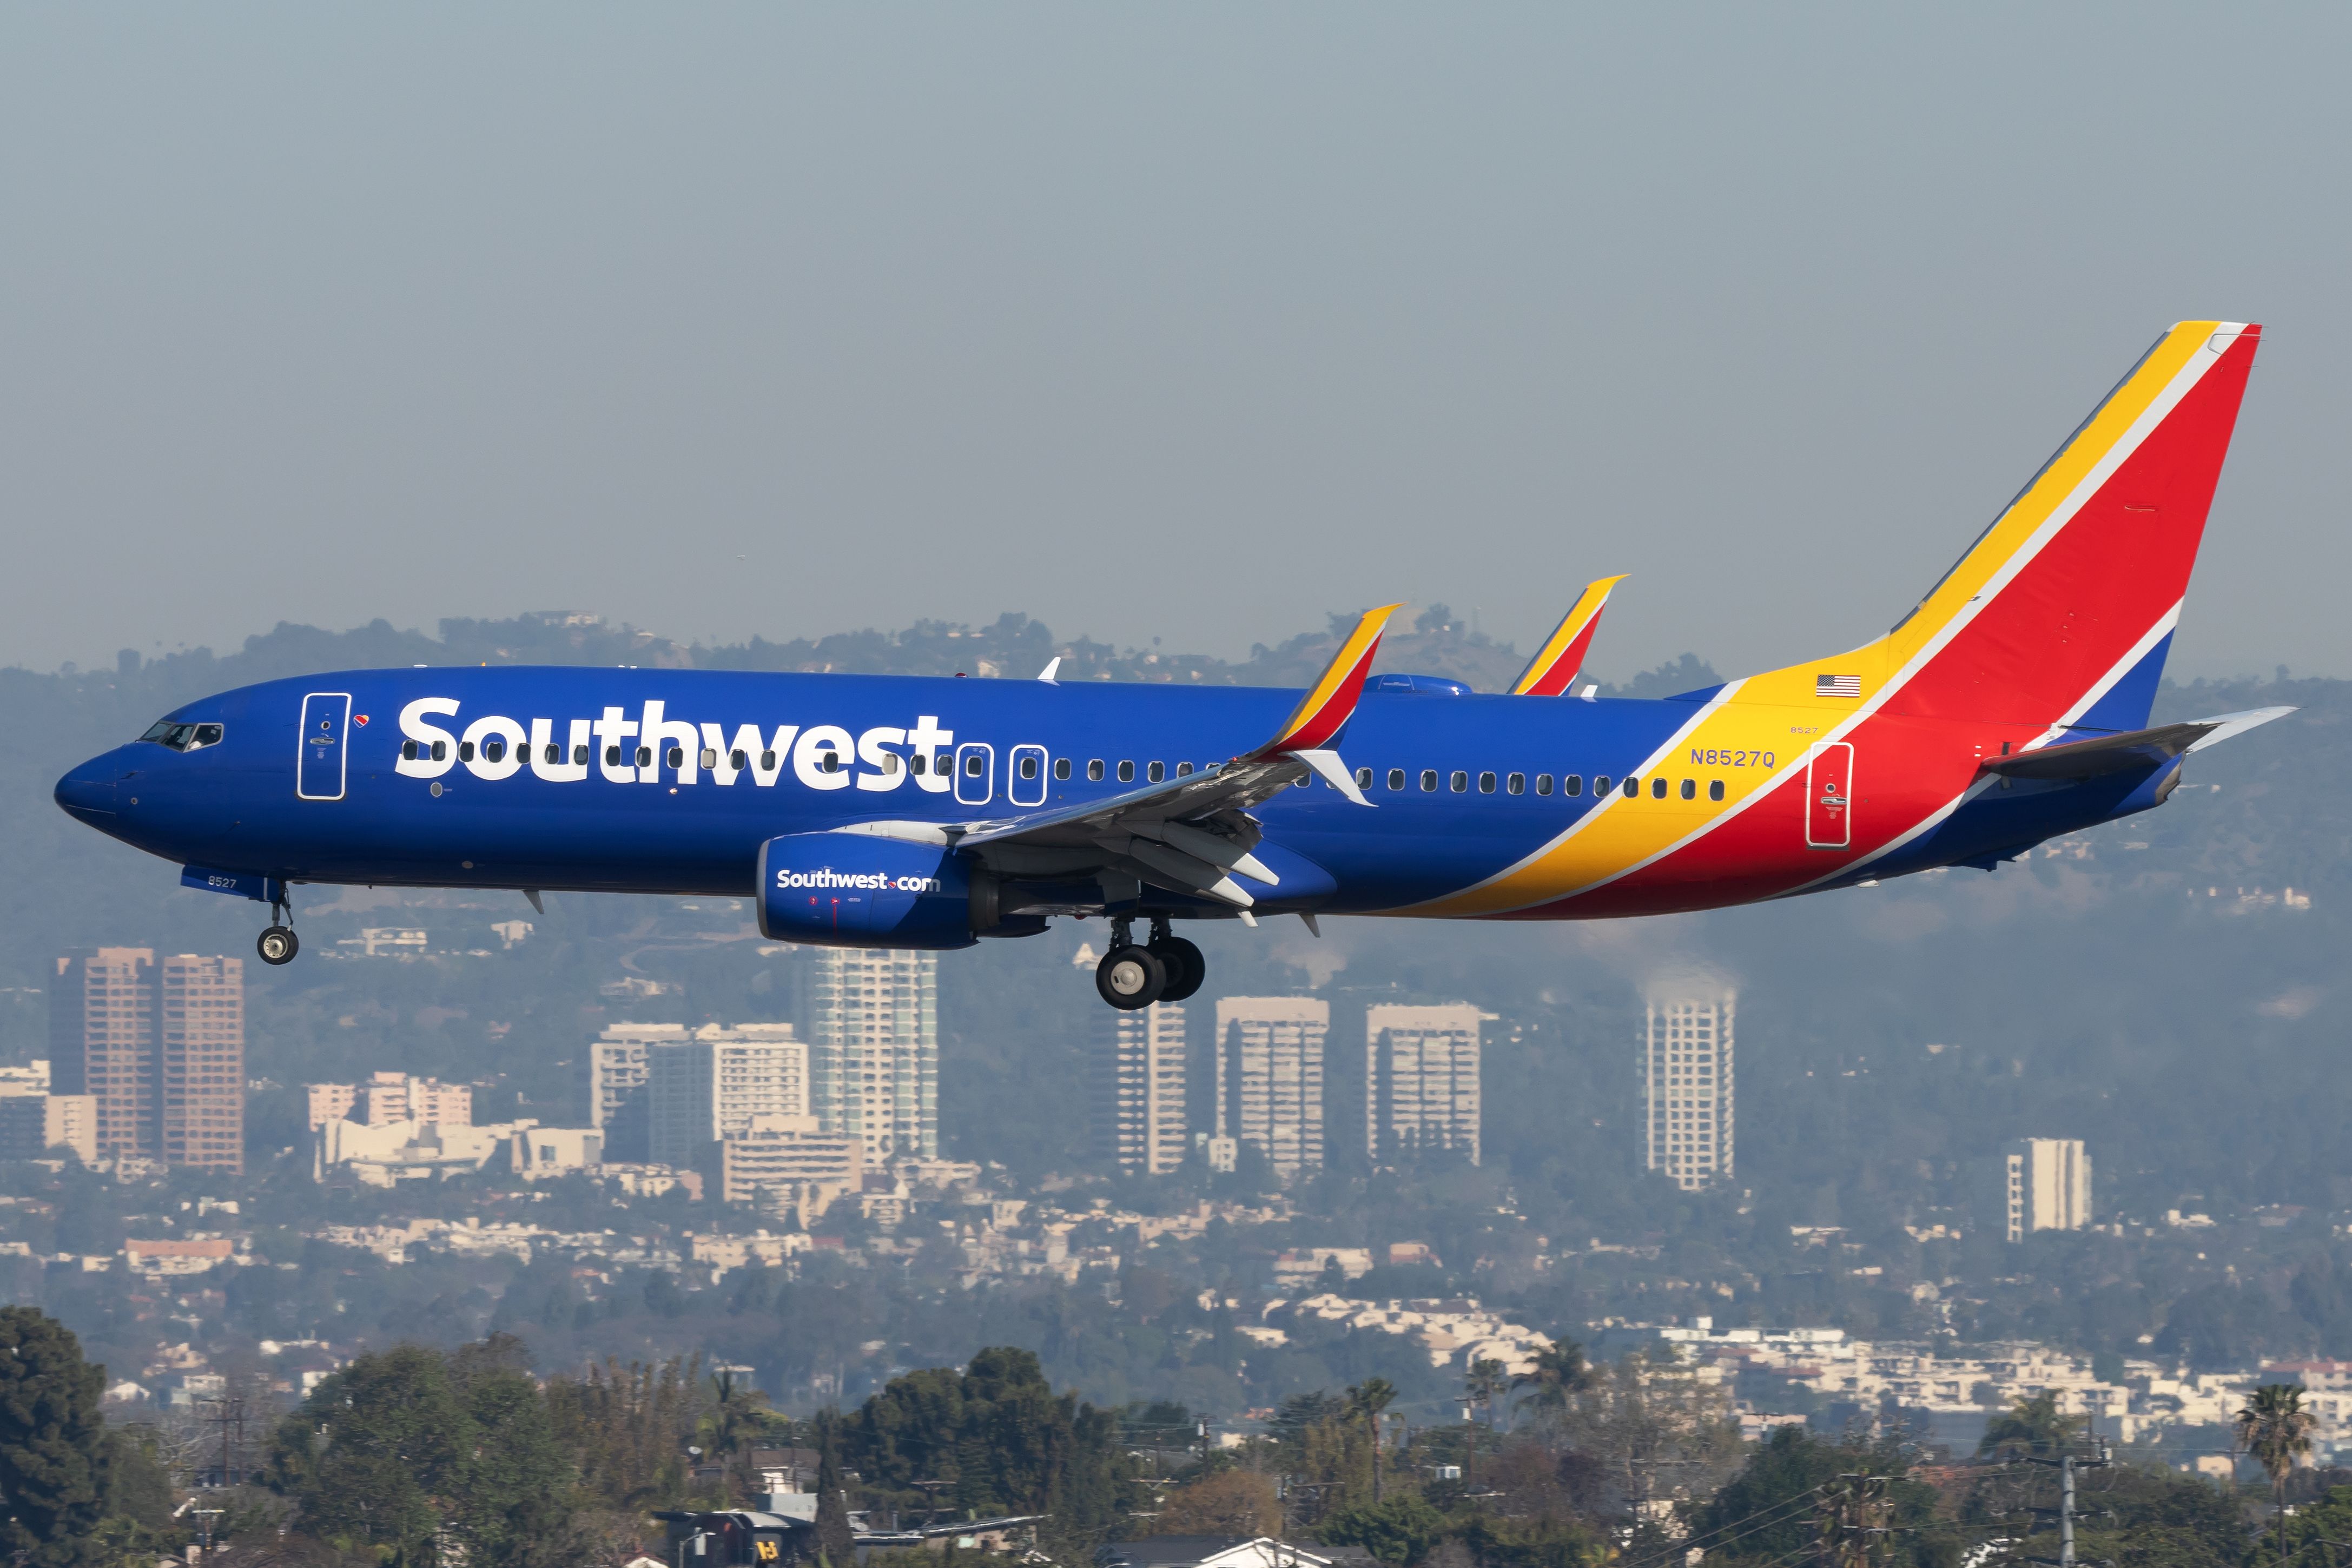 Southwest Airlines Boeing 737-8H4 N8527Q at approach at Los Angeles International Airport. 